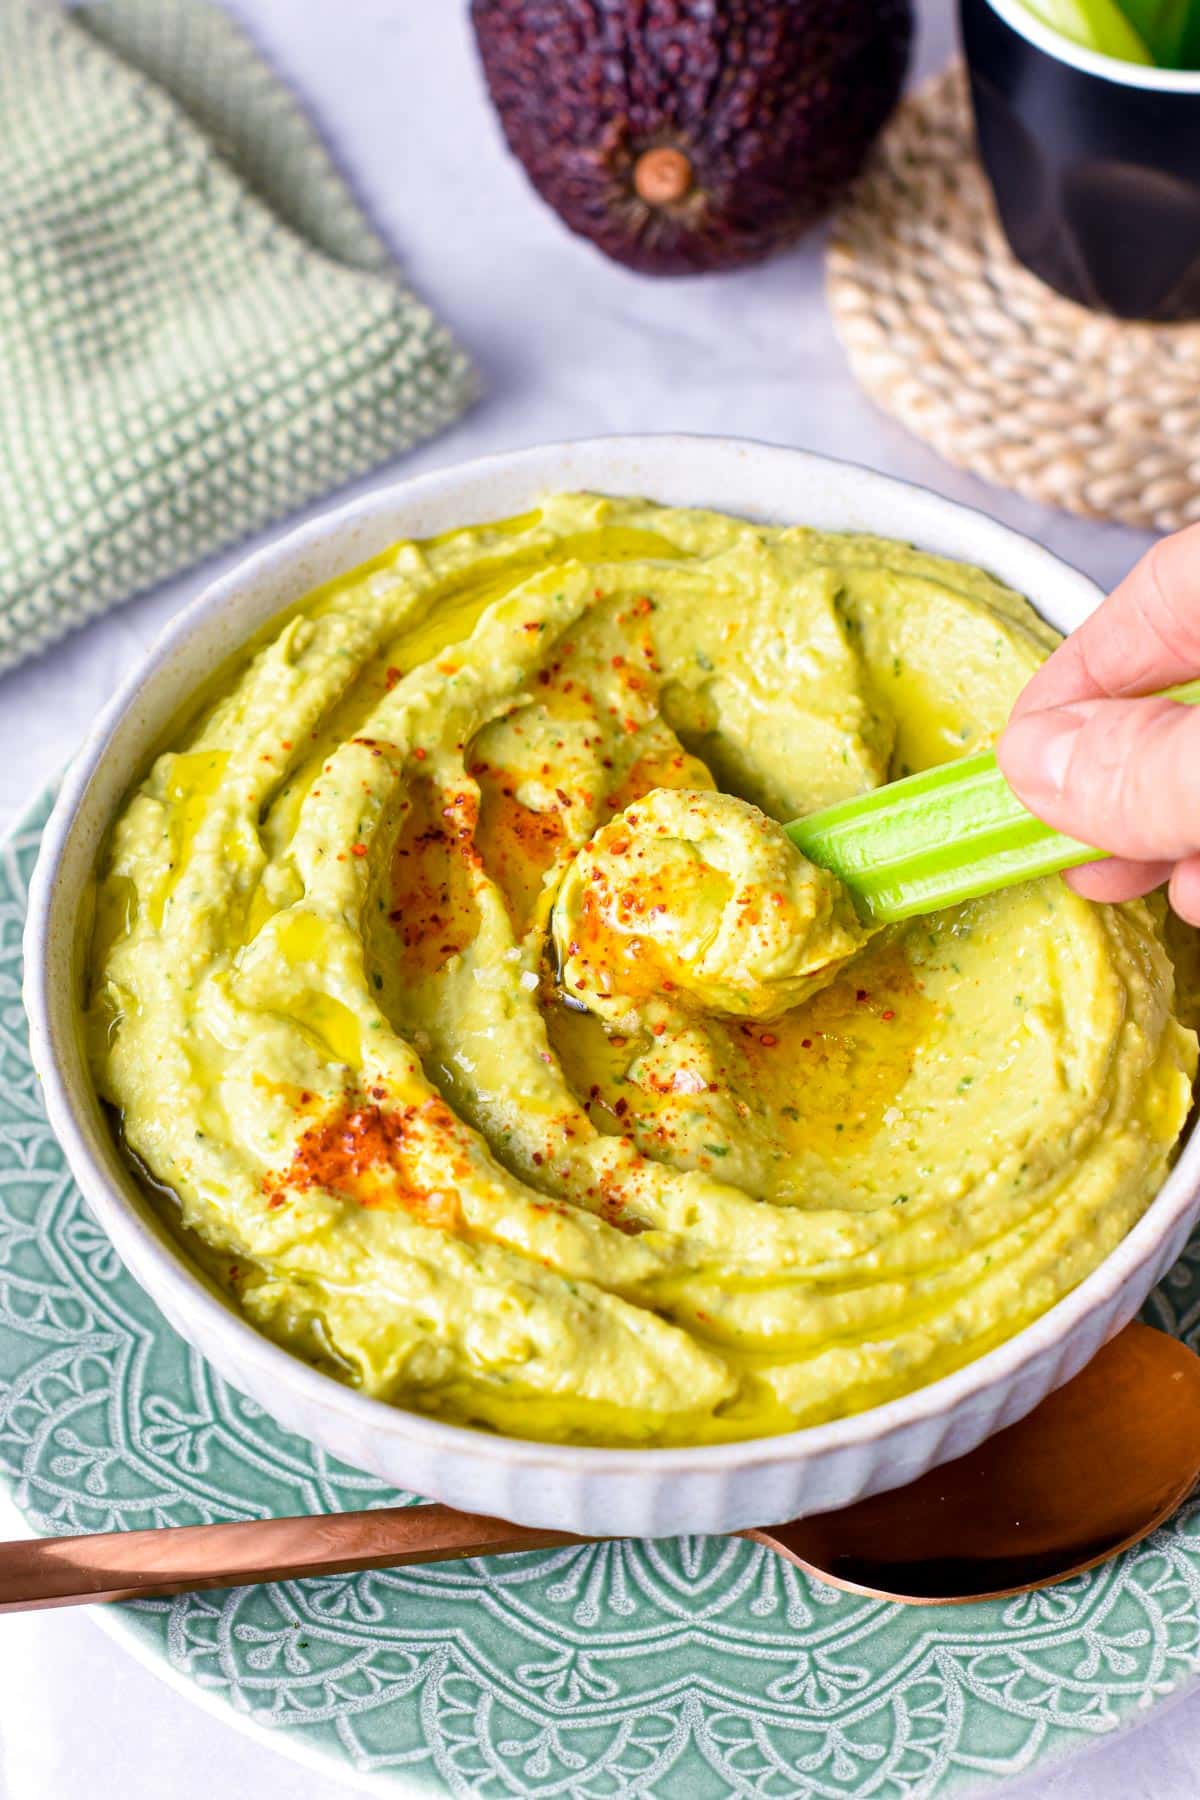 Avocado Hummus with a stick of celery dipped into it.